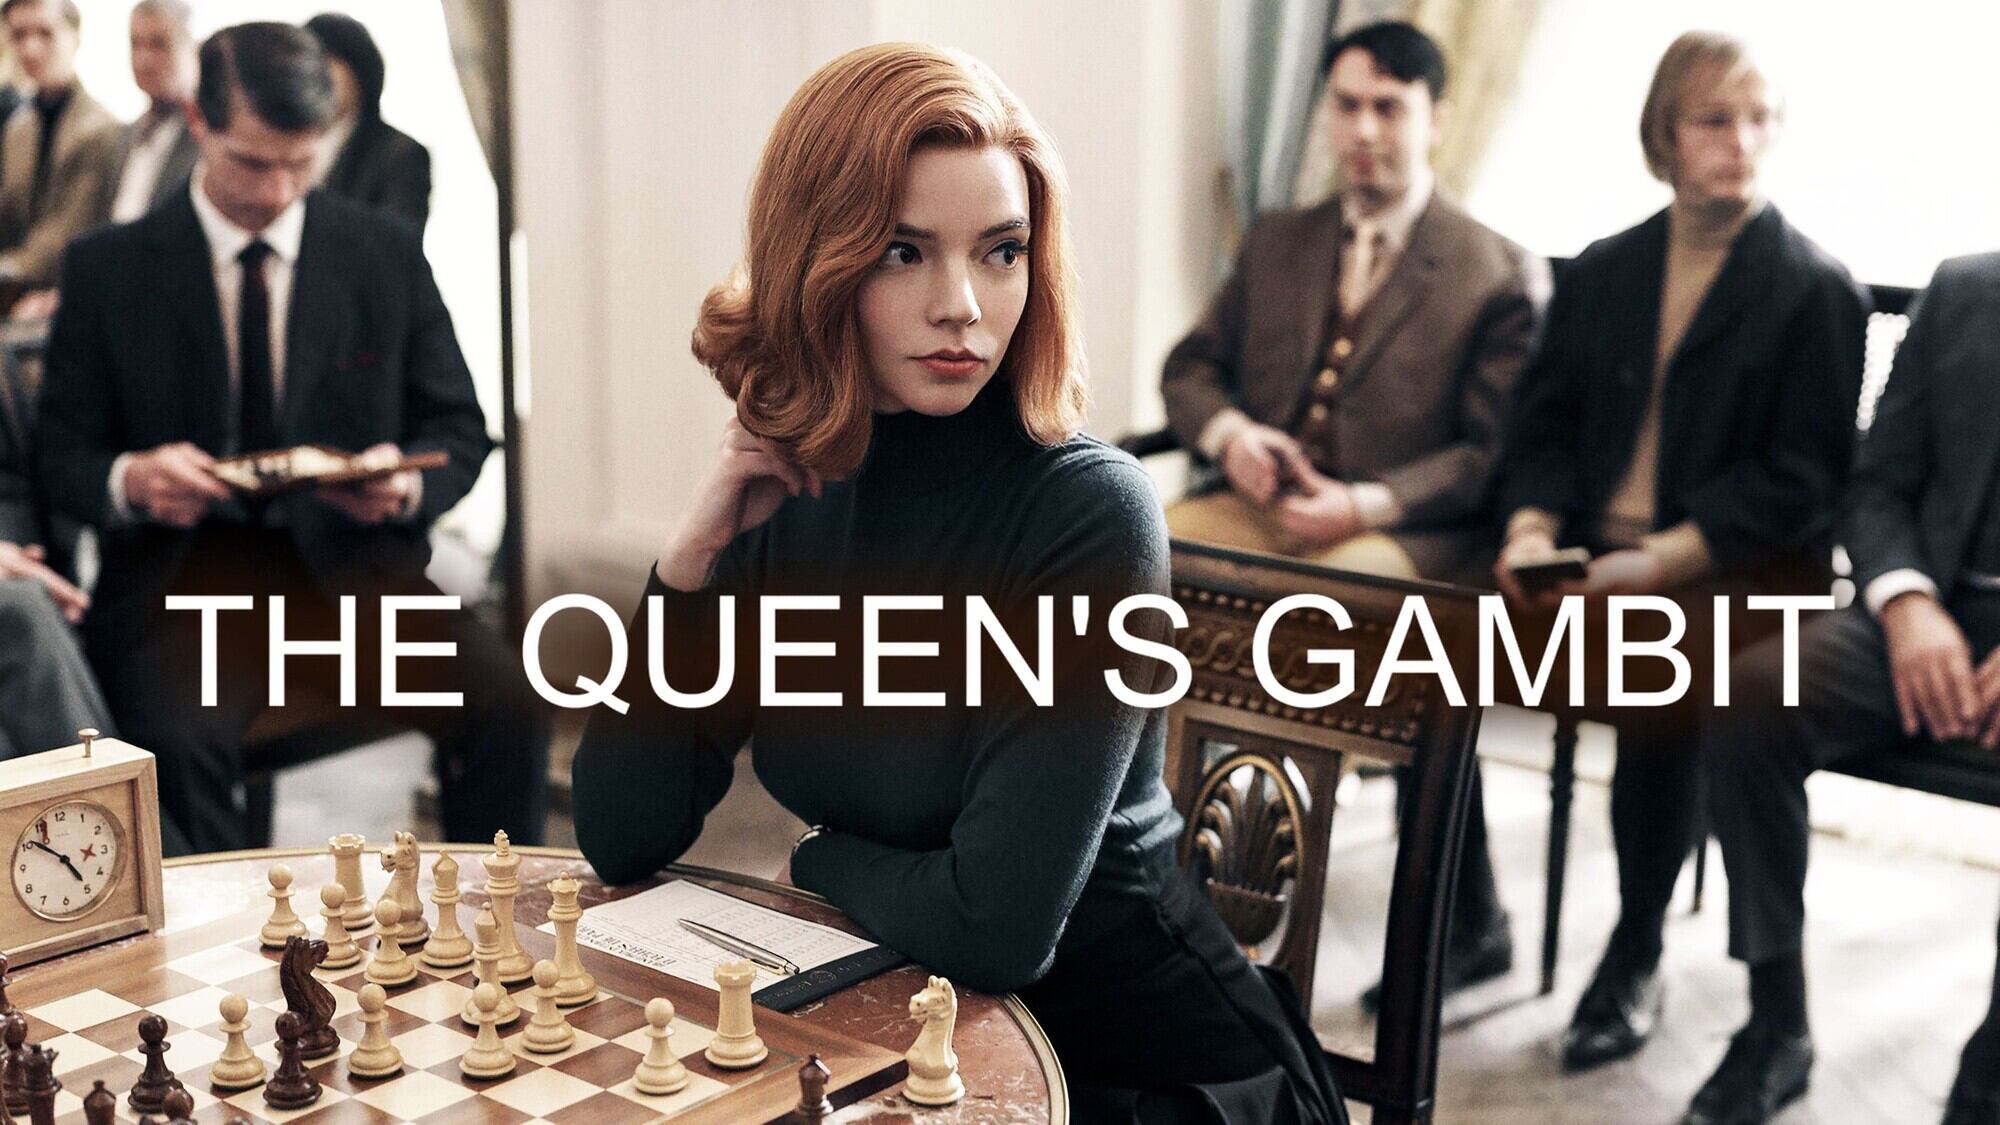 39-facts-about-the-movie-the-queens-gambit